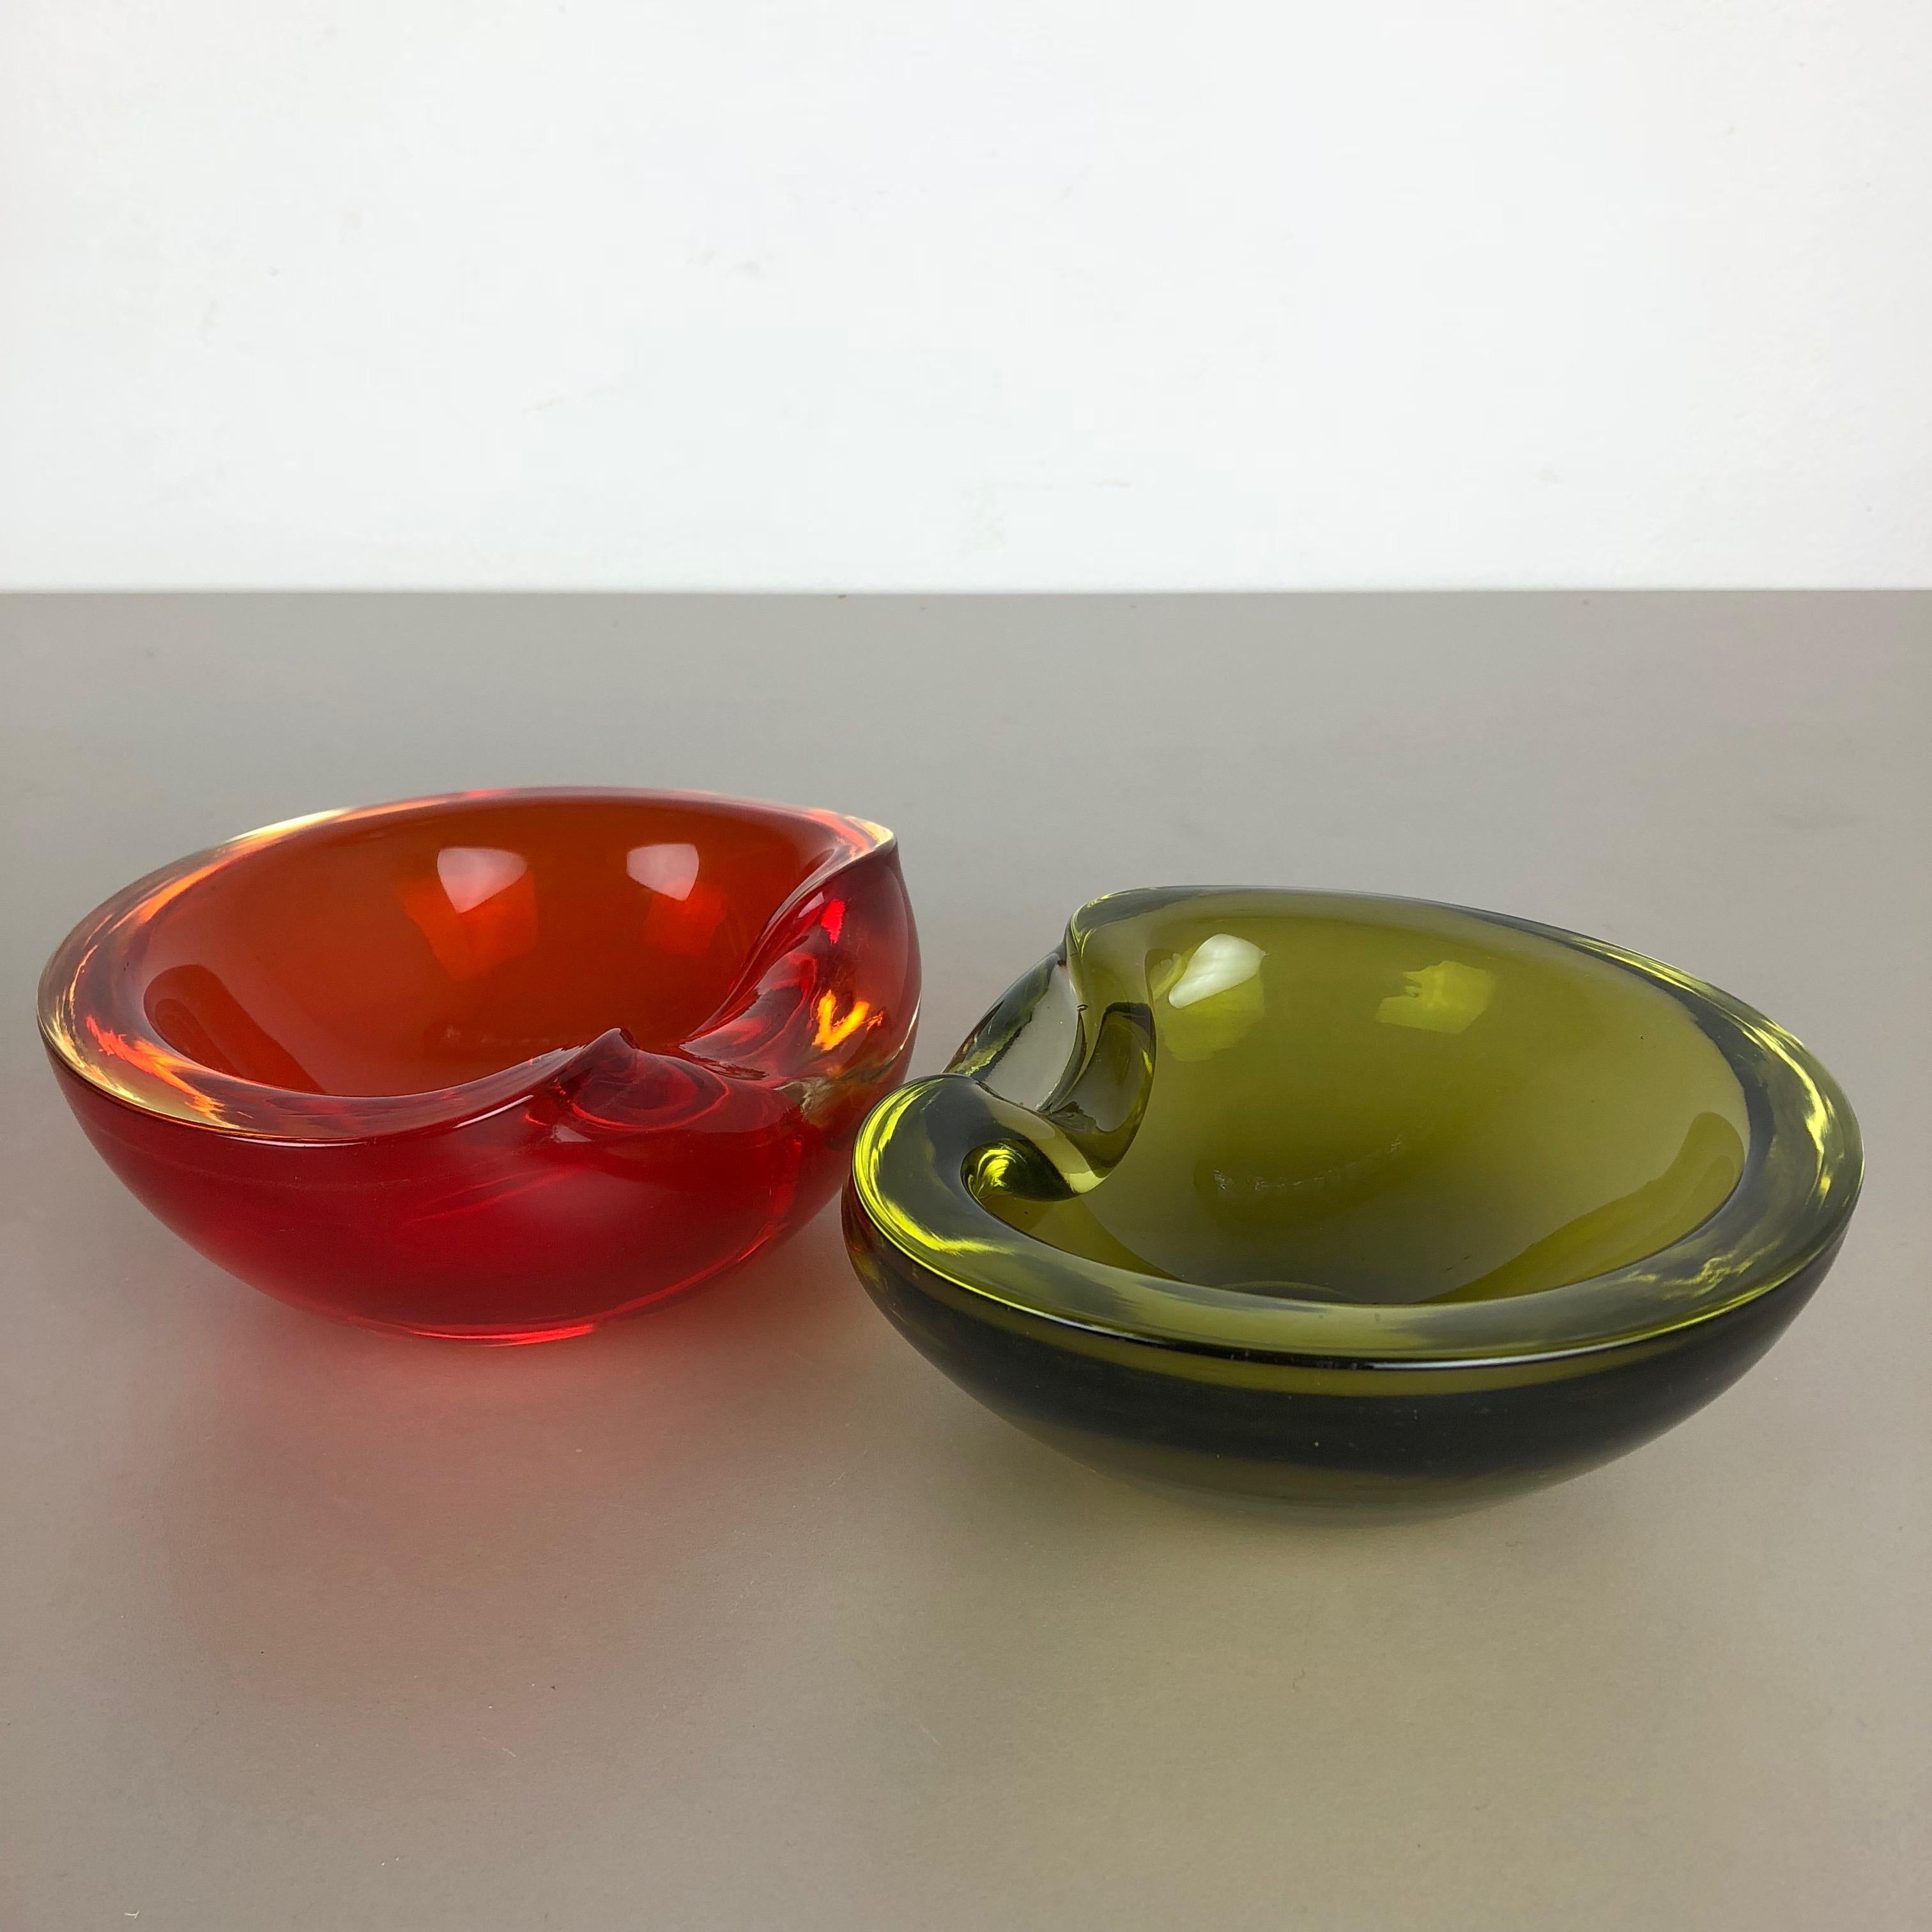 Article:

Murano glass bowl set of 2



Producer:

Cenedese Vetri (marked underneath the bowl)


Origin:

Murano, Italy


Decade:

1960s-1970s


This original glass bowl set was produced in the 1960s-1970s in Murano, Italy. It